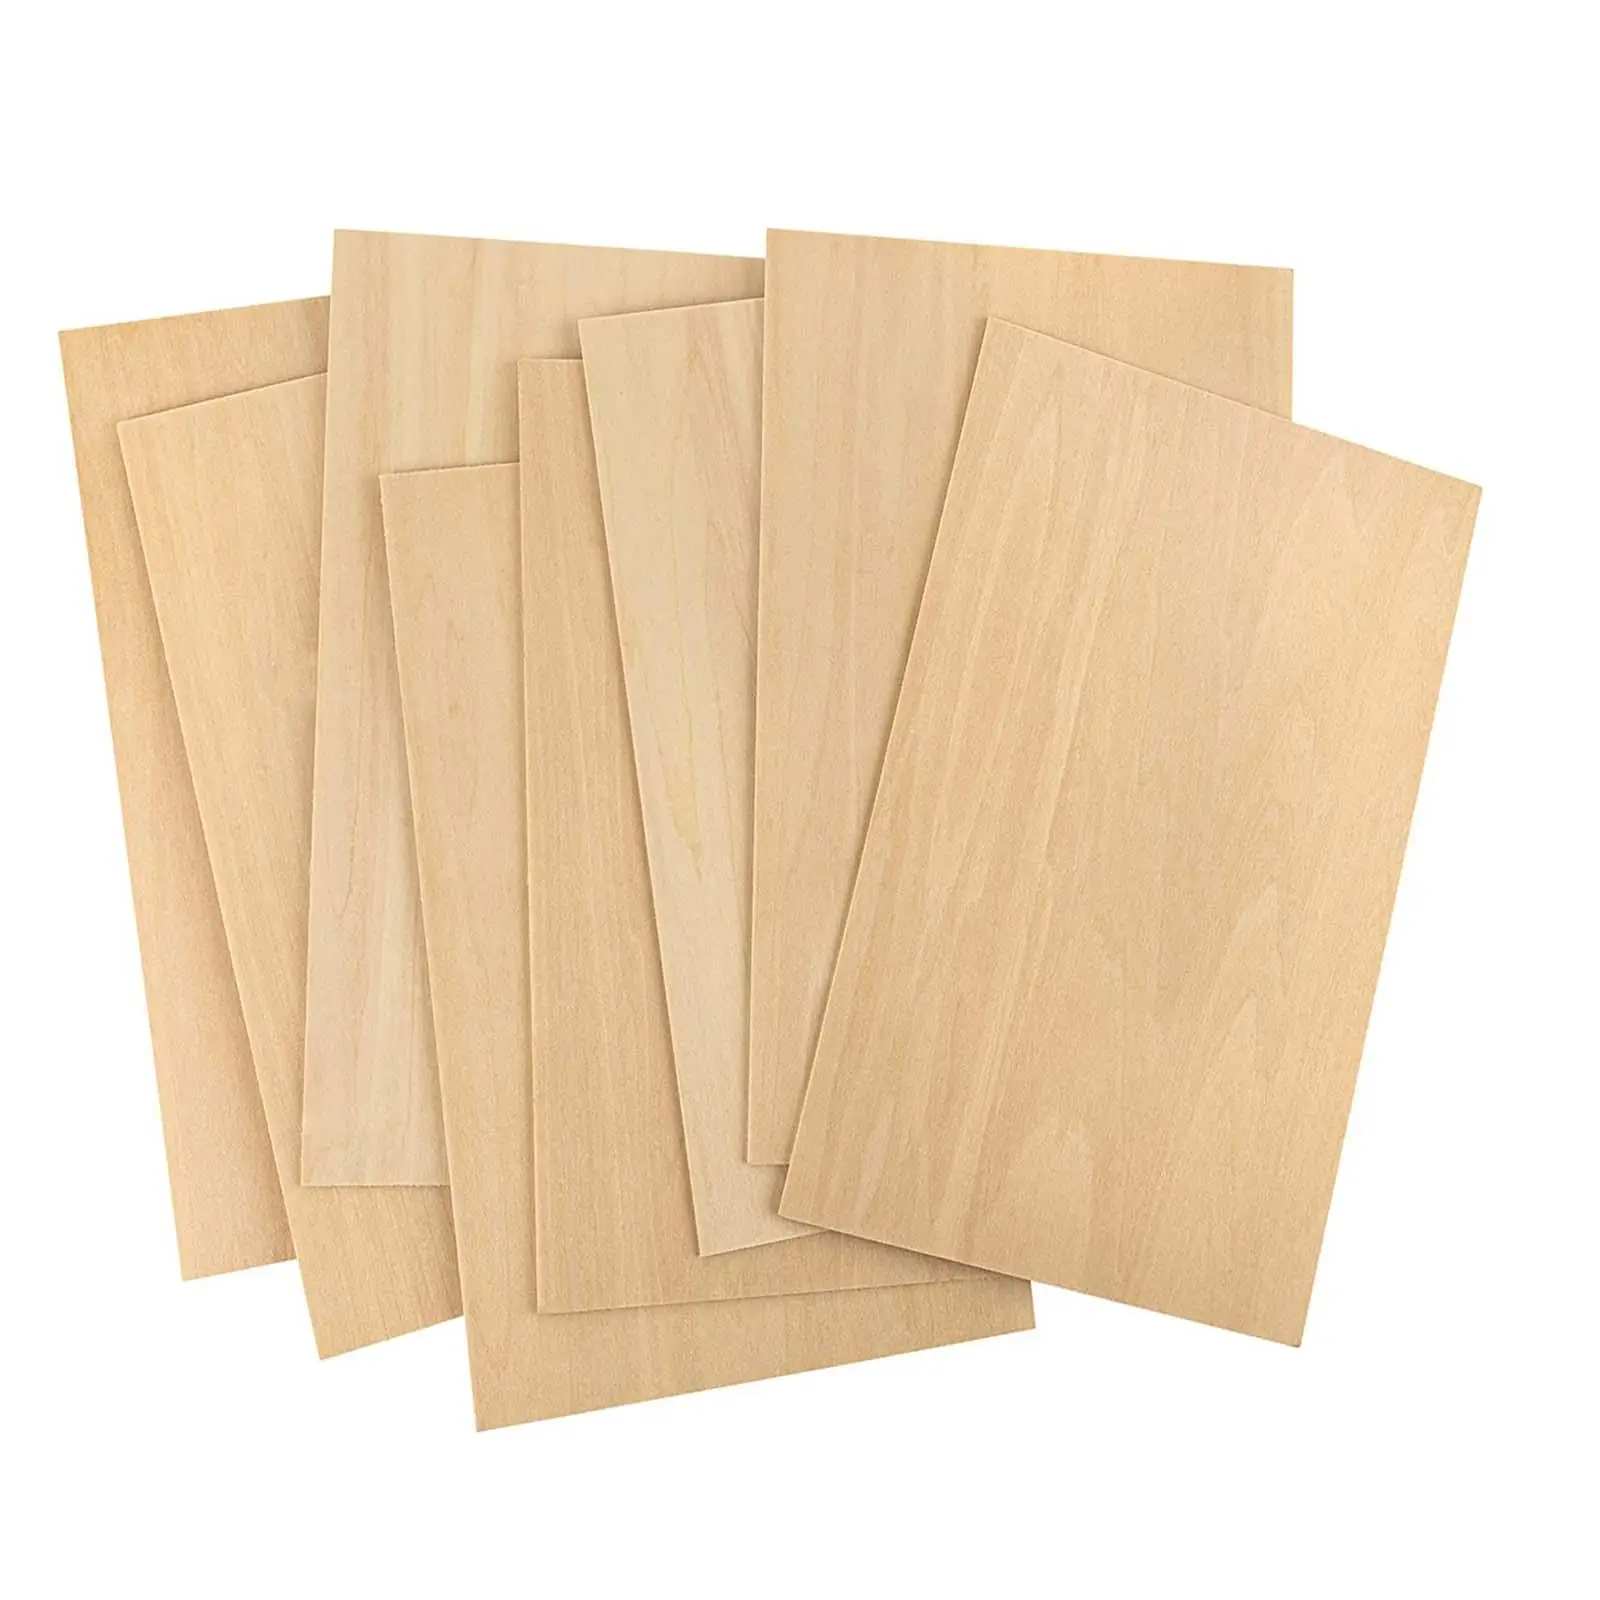 8x Unfinished Wood Miniature Models Making Thin Plywood Board for Making Plane Model Crafts DIY Project Miniature Aircraft